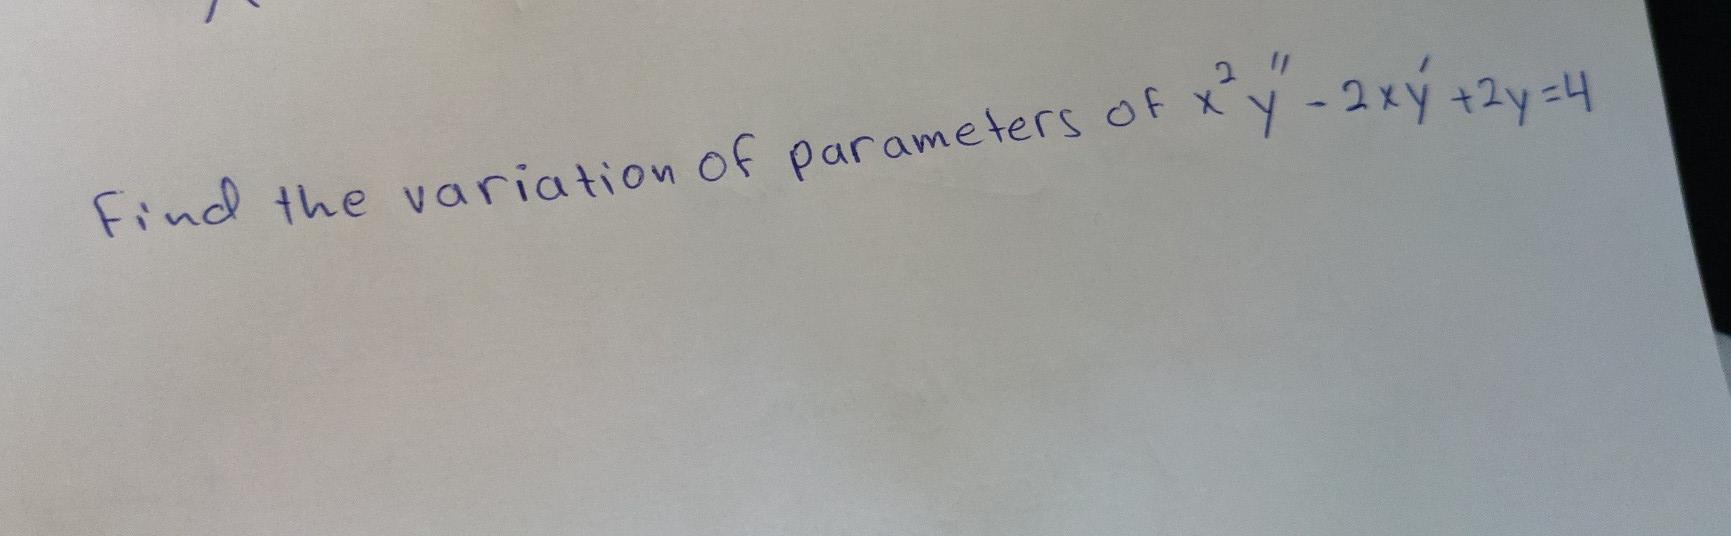 X 2xy 2y 4 Find The Variation Of Parameters Of 1